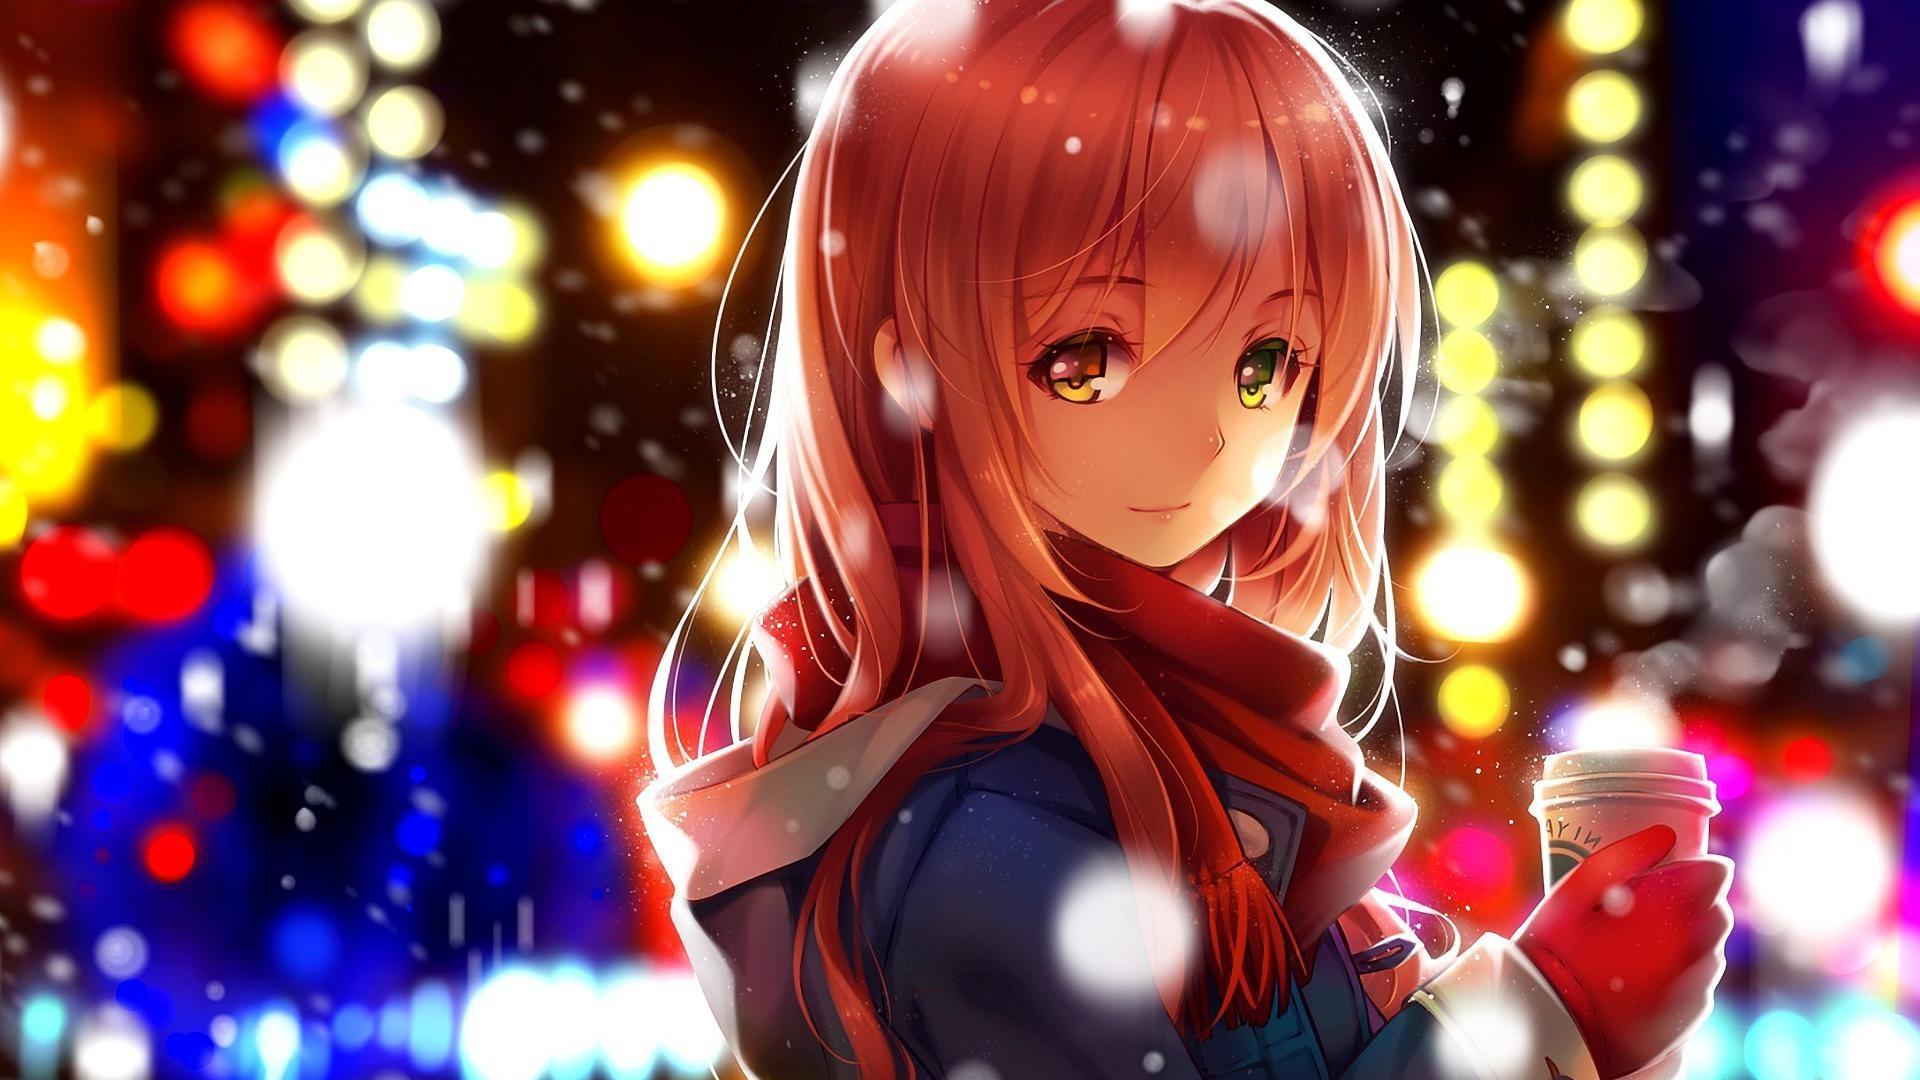 anime Girls, Anime, Scarf, Original Characters Wallpaper HD / Desktop and Mobile Background